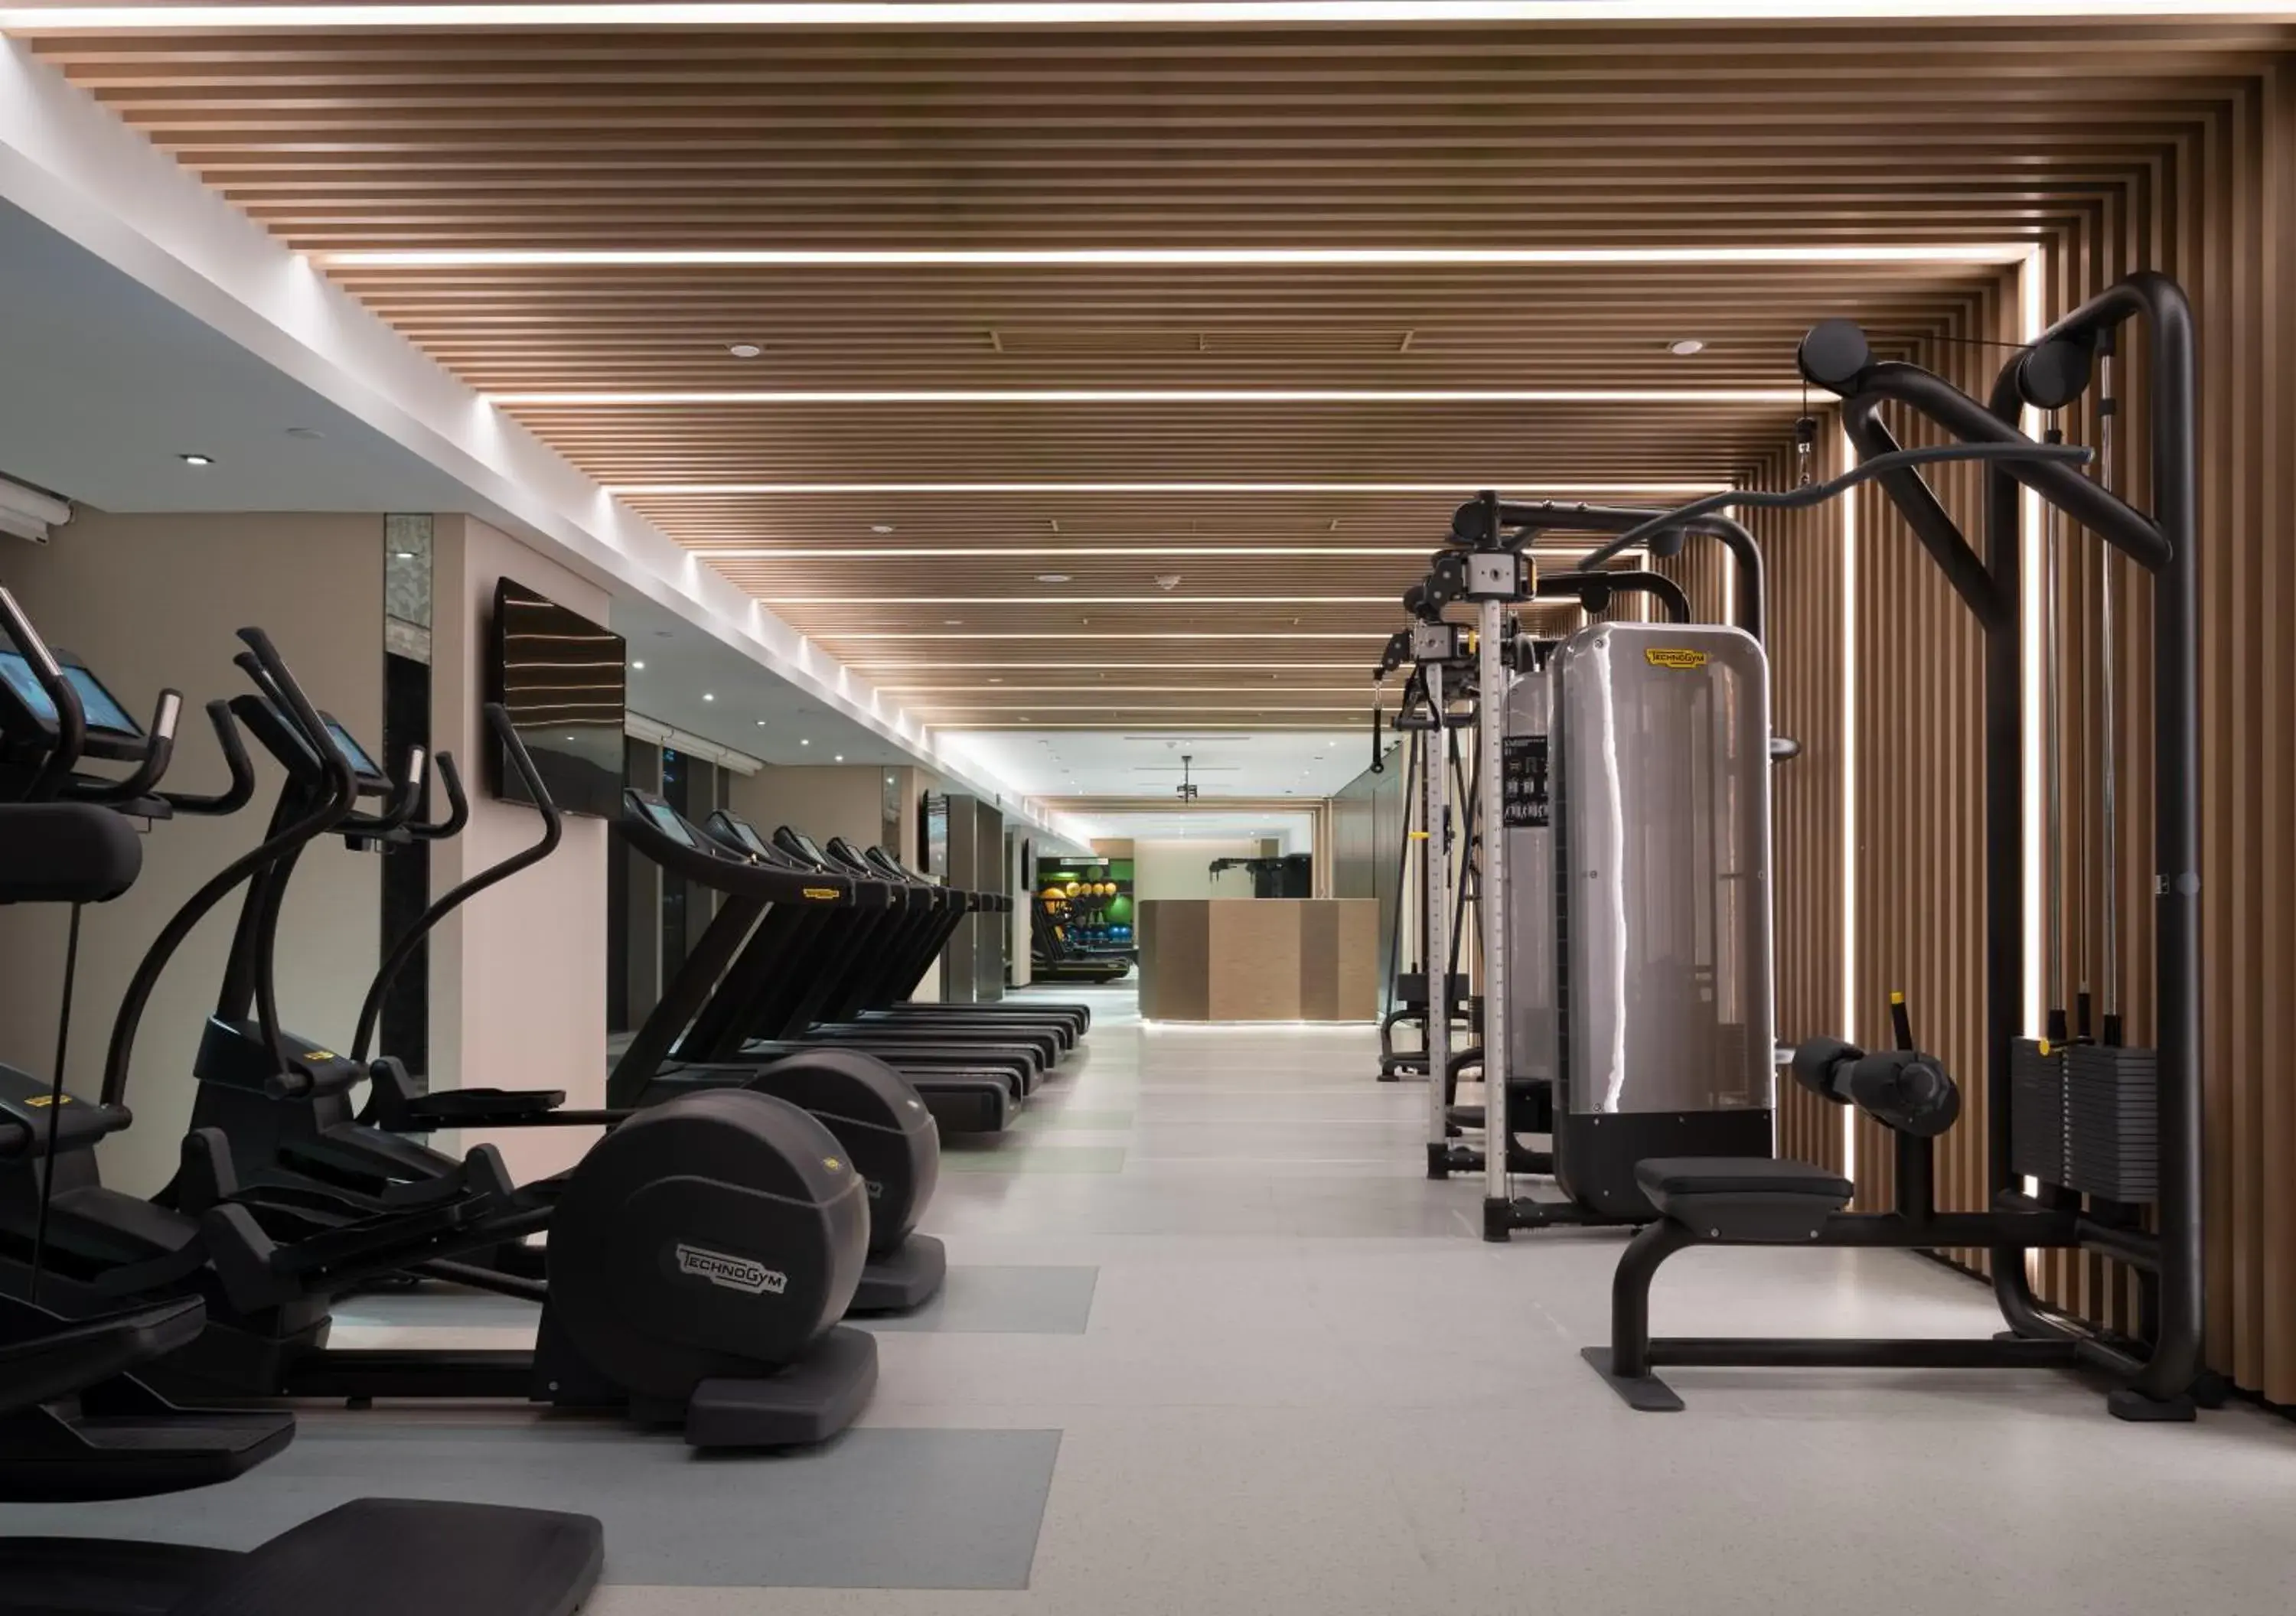 Fitness centre/facilities, Fitness Center/Facilities in Jumeirah Living Guangzhou - Complimentary Shuttle Bus to Canton Fair Complex during Canton Fair period